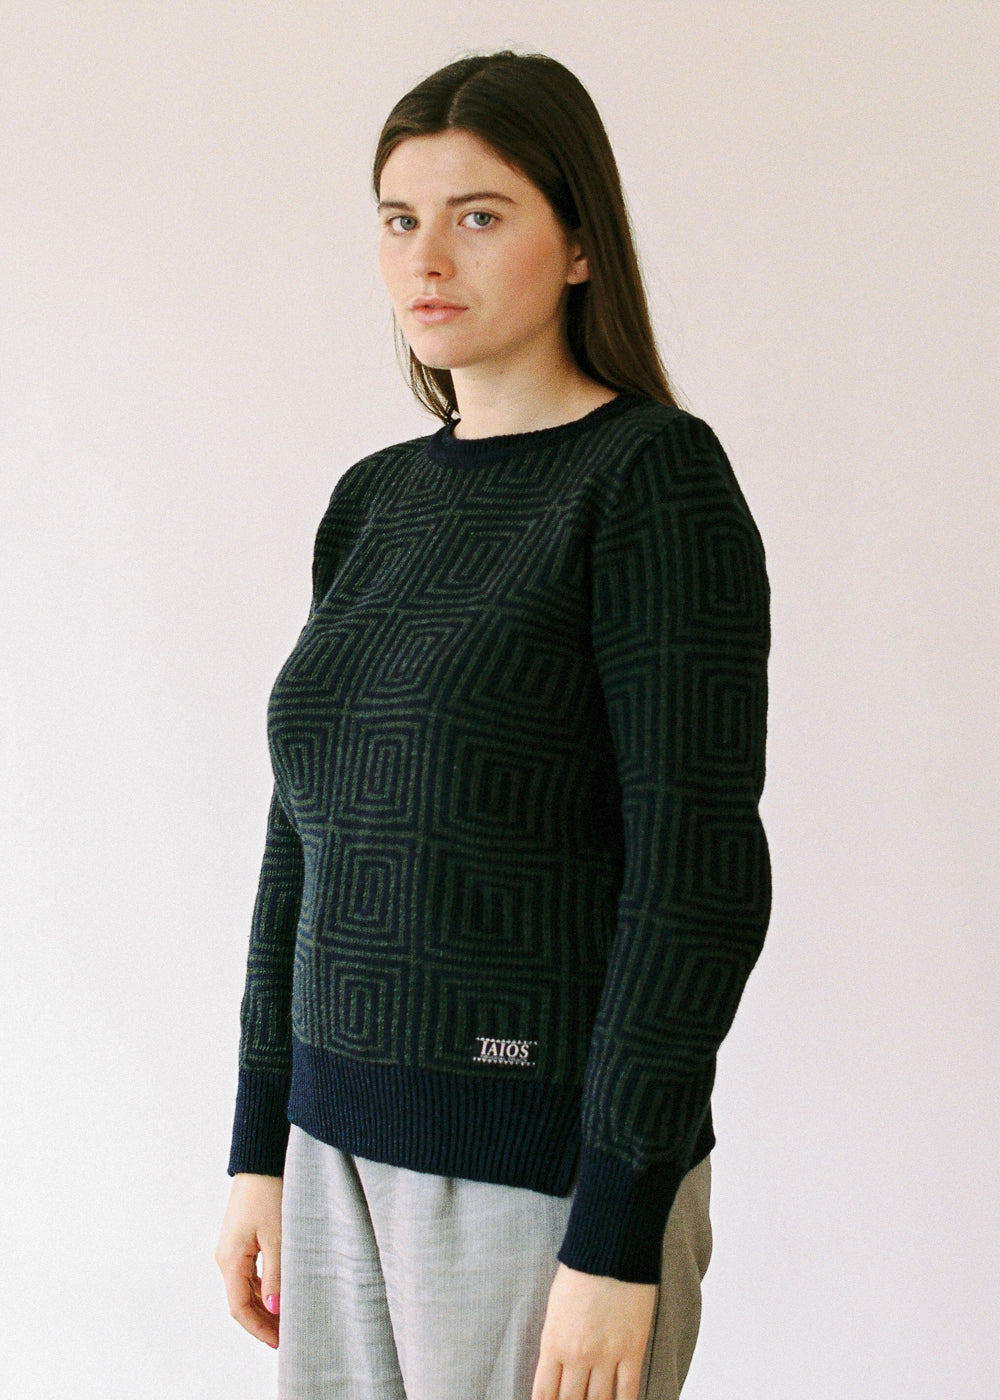 The model with the sweater. The dark colors give it an elegant and discreet touch.